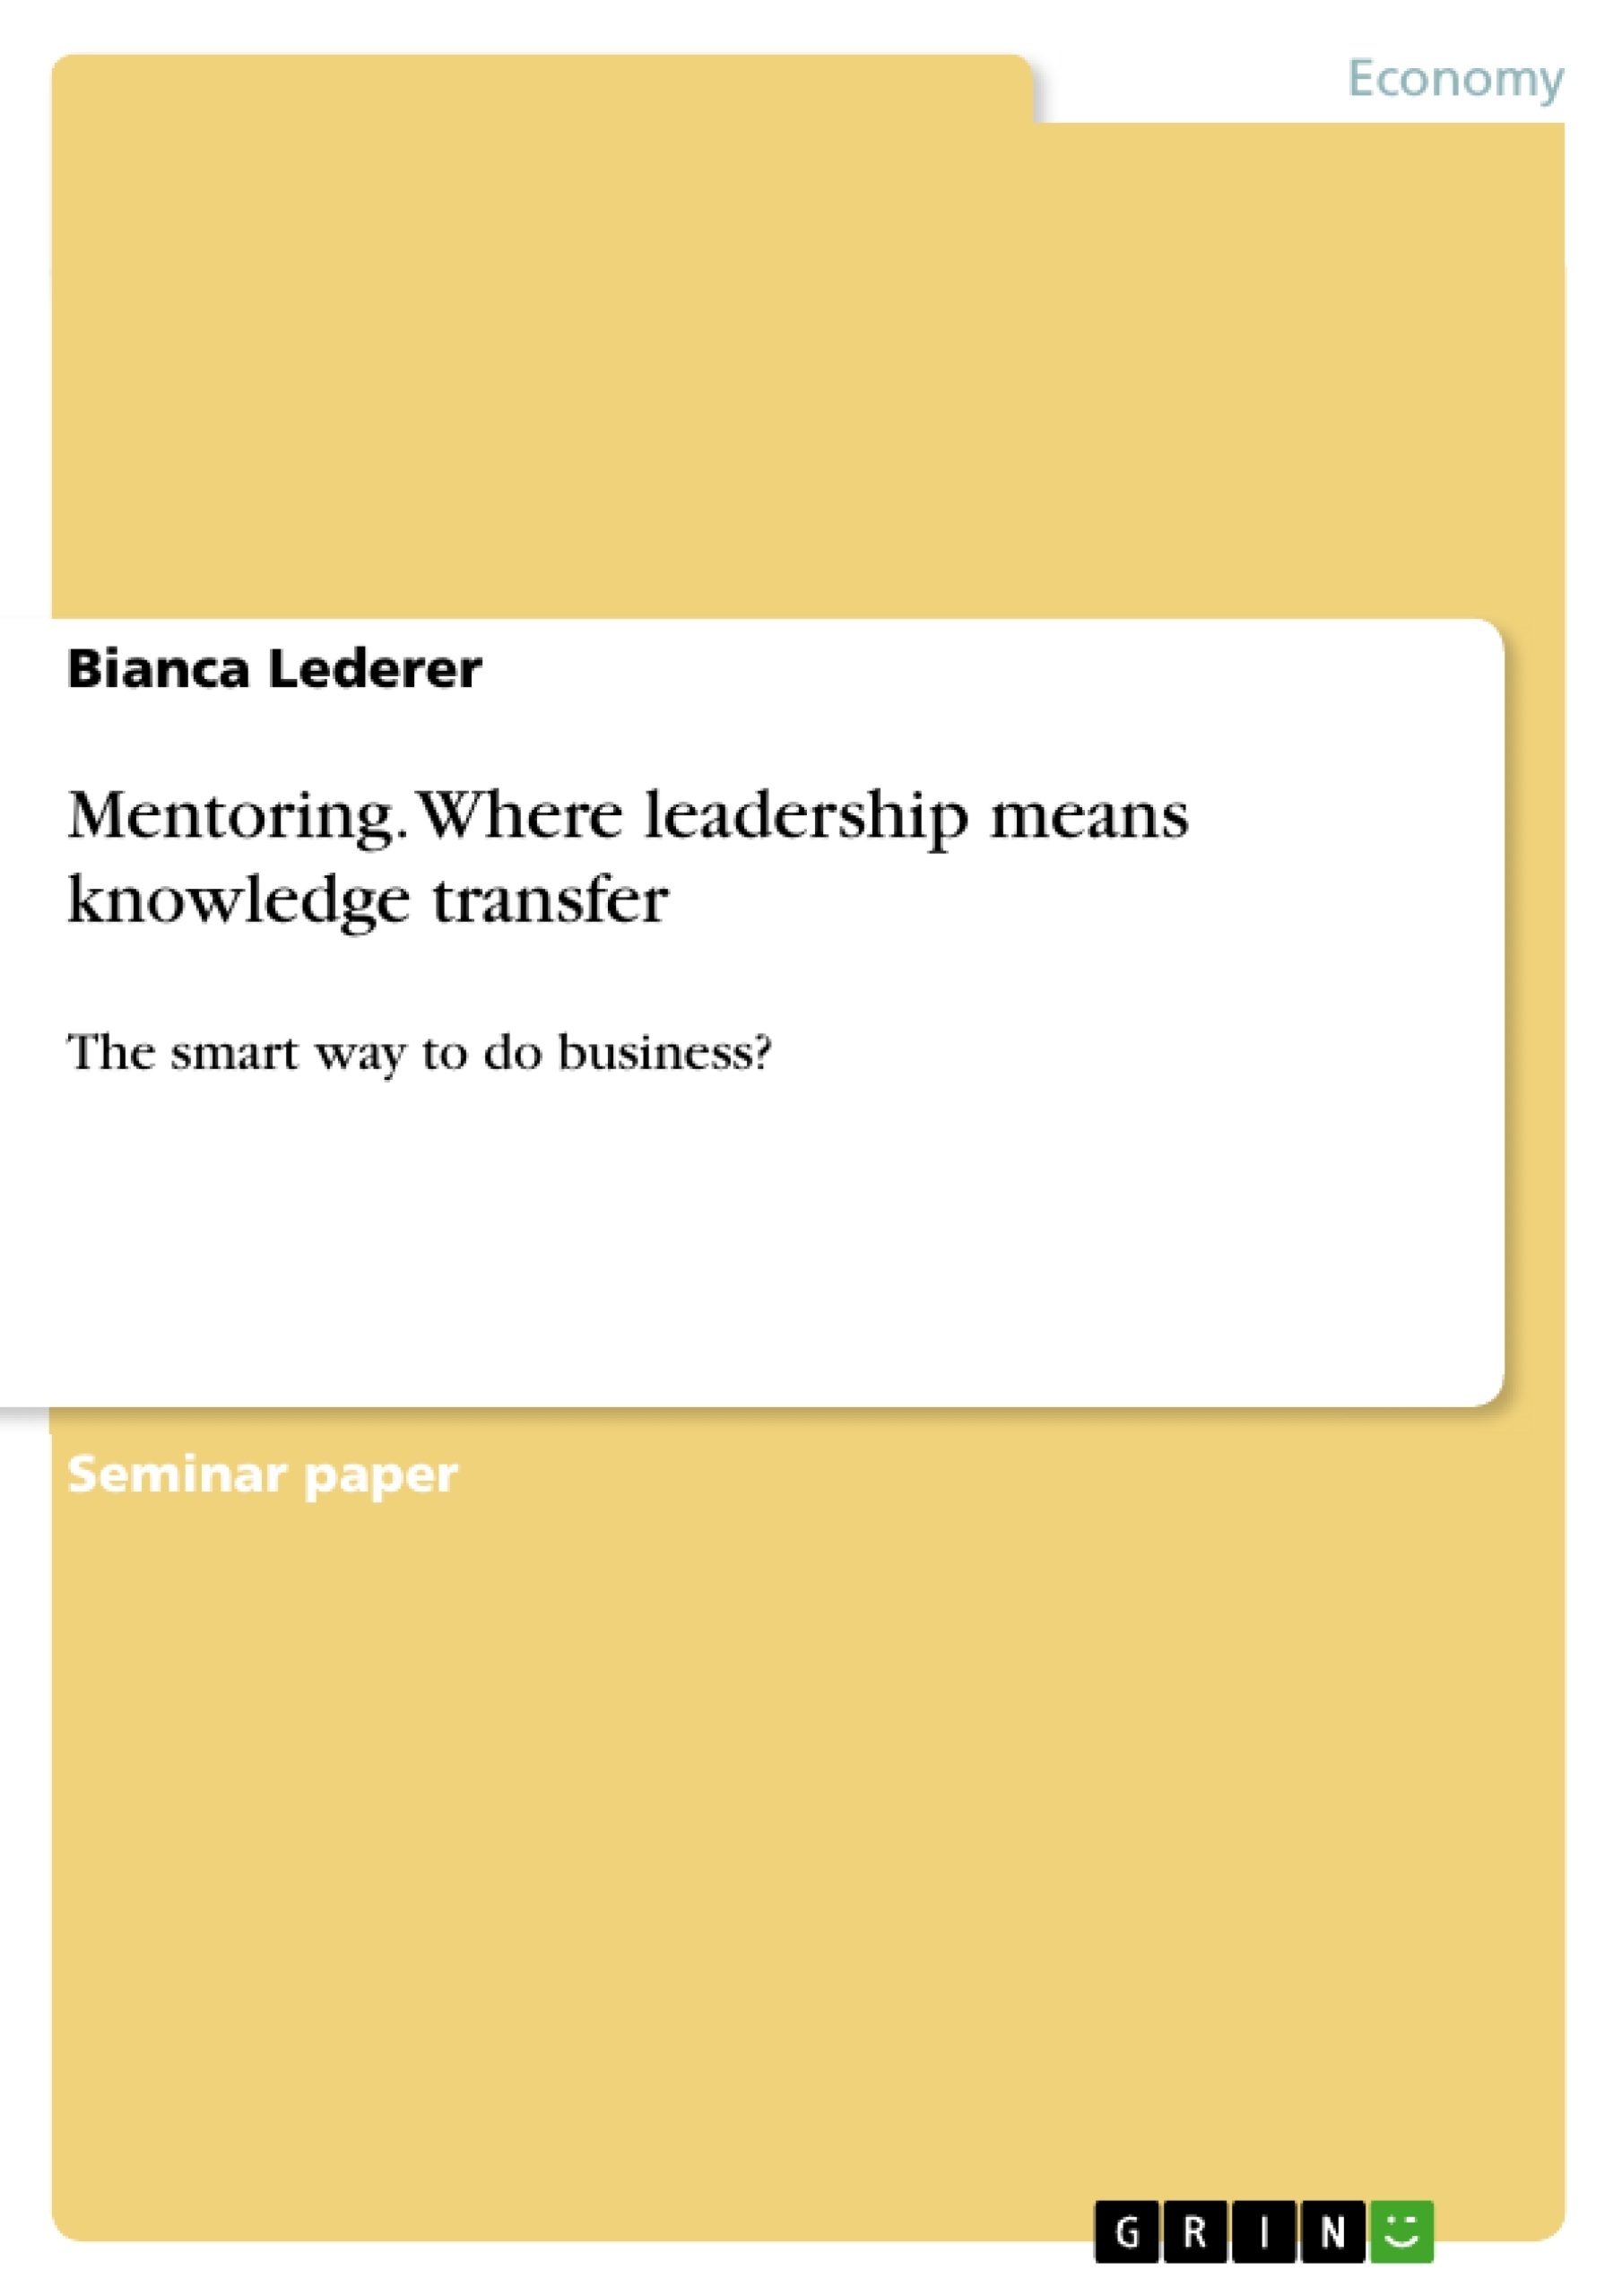 Title: Mentoring. Where leadership means knowledge transfer